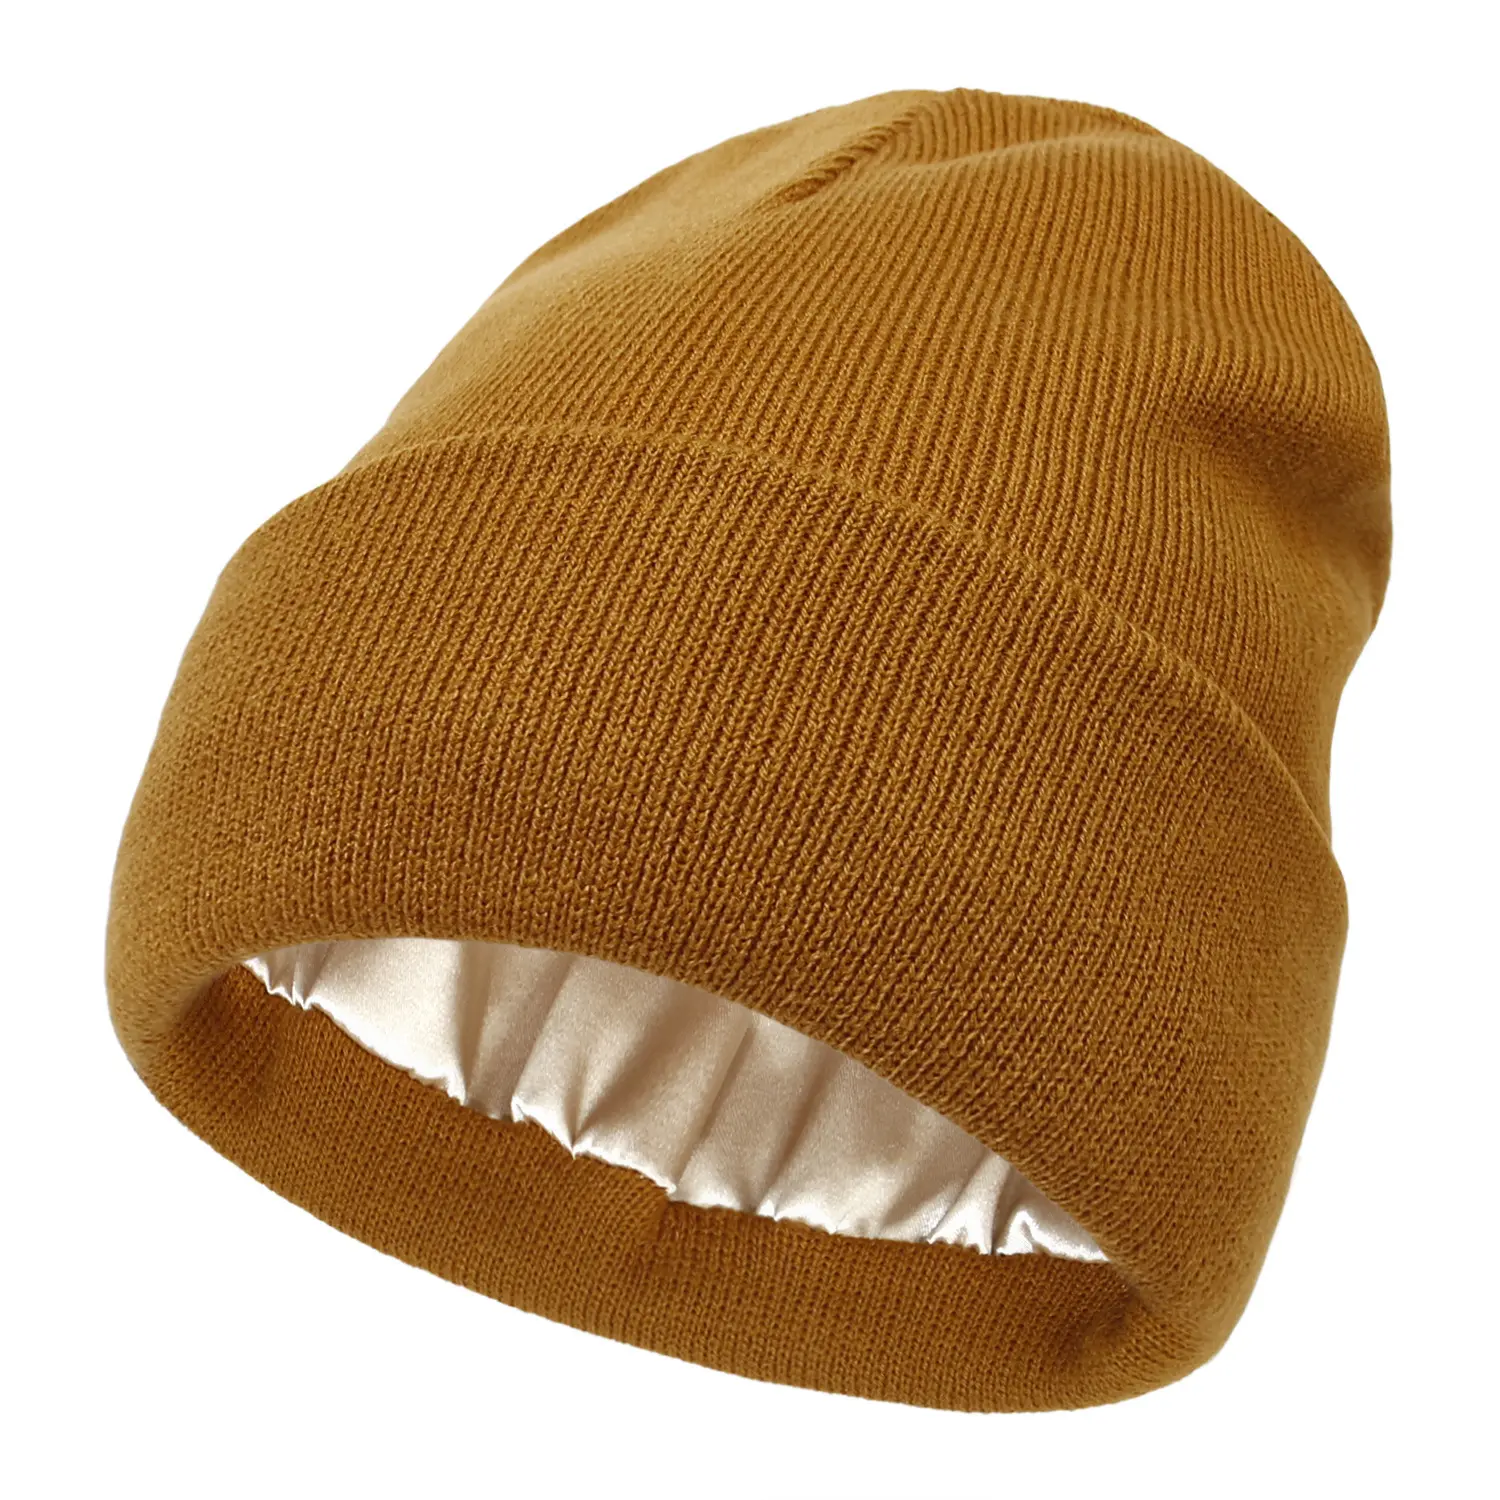 Hot Selling Solid Color Satin Lining Bonnet Hats Outdoor Knitting Warm Hat for Men & Women Sports Street Outdoor Sports Skiing